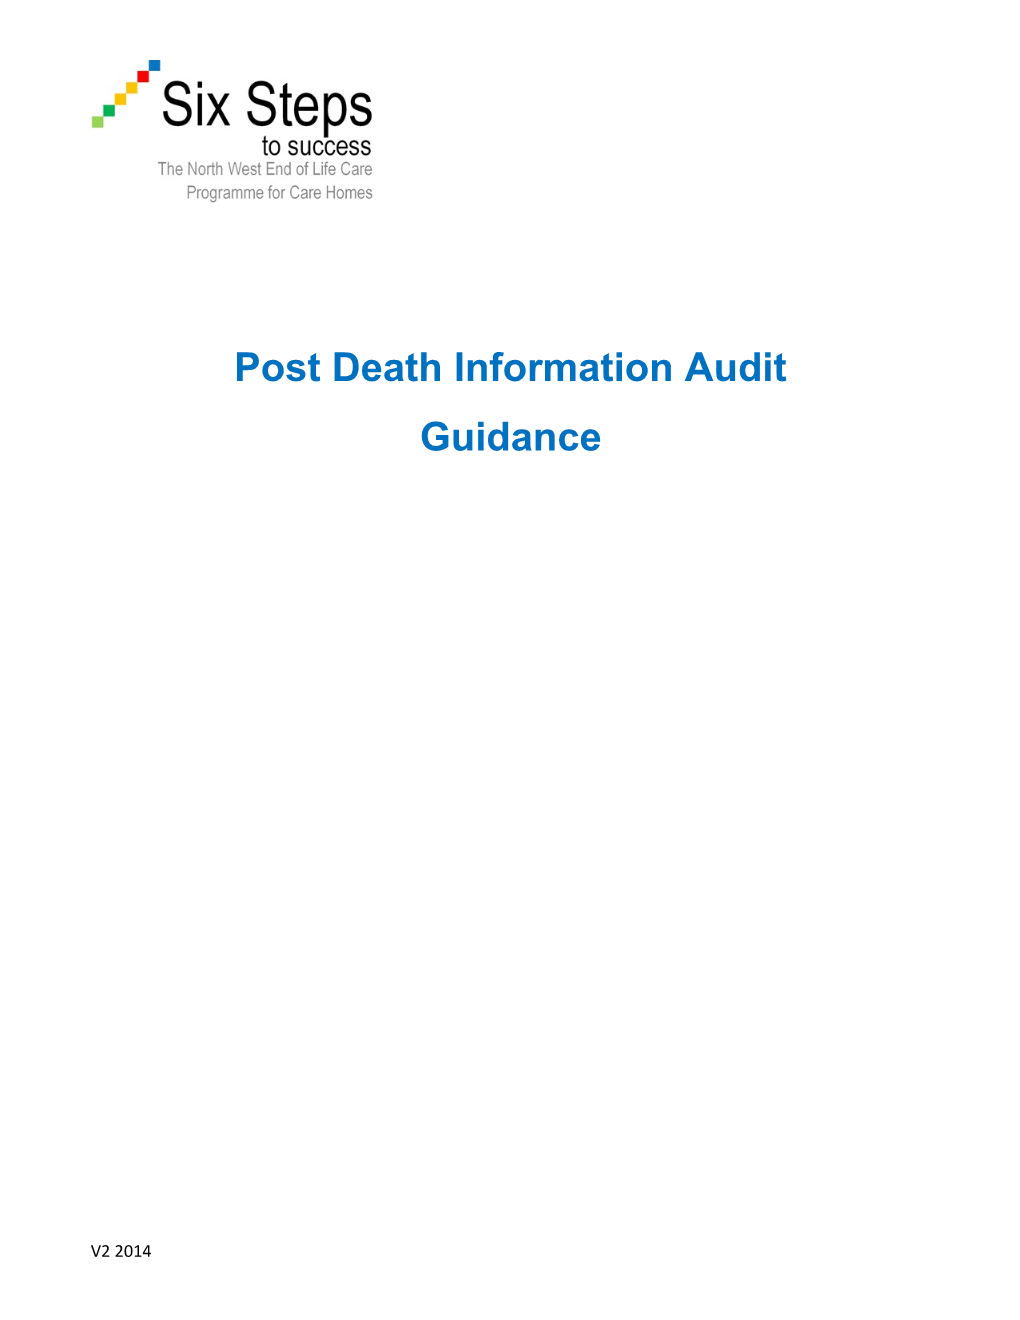 Post Death Information (PDI) Audit and Tool